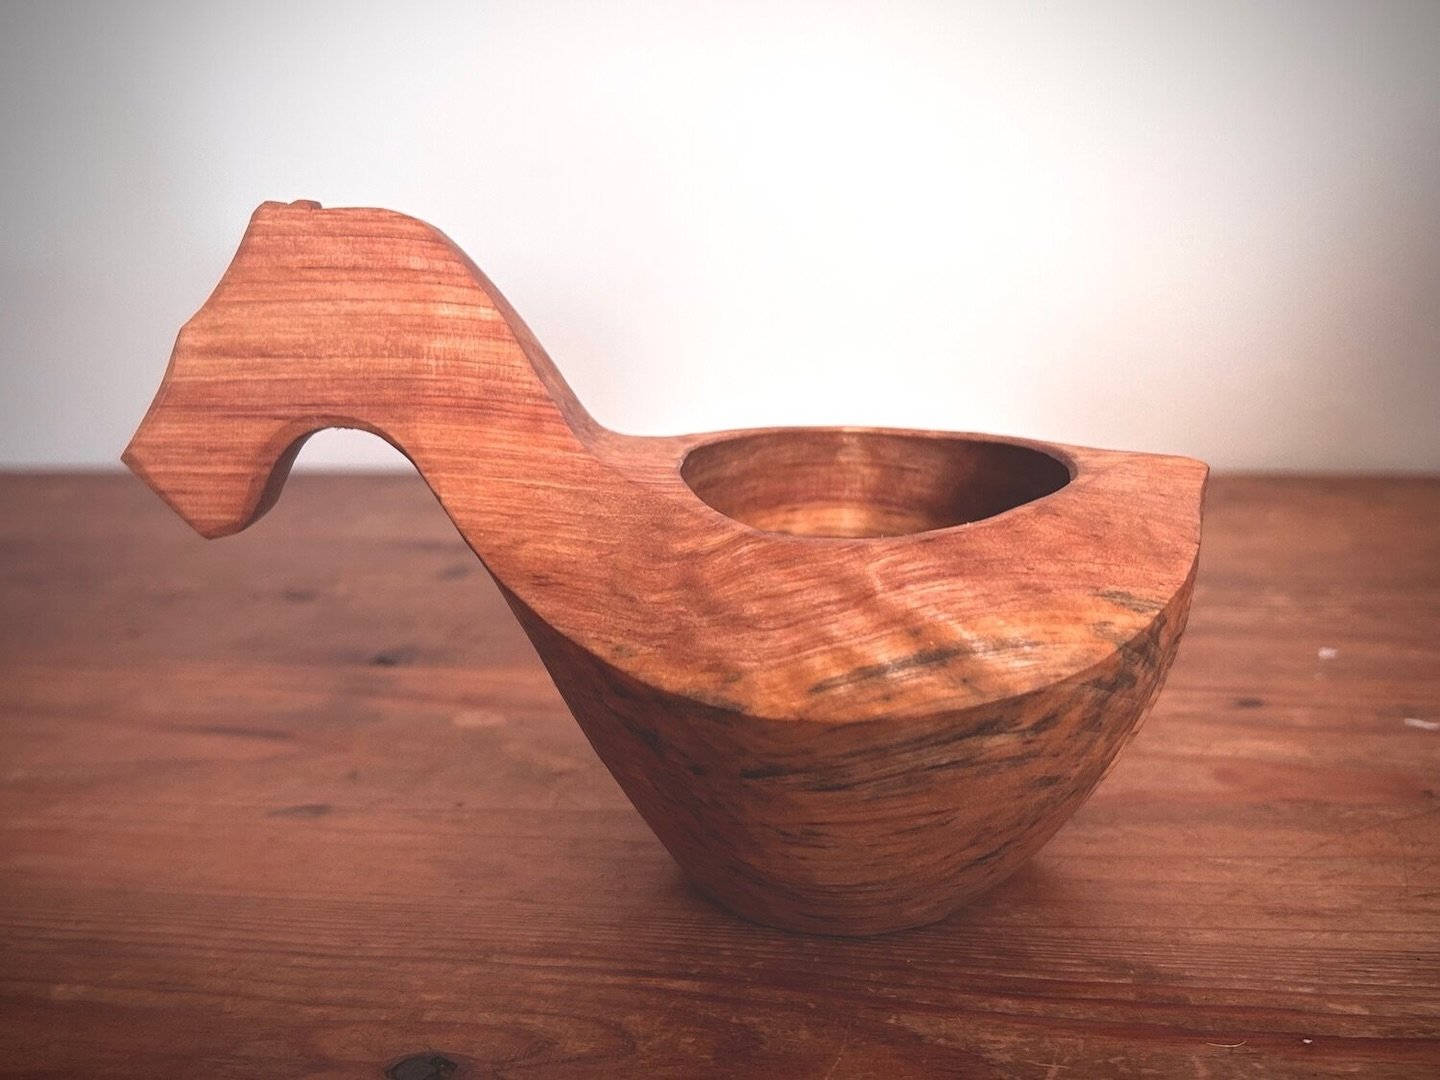 This beauty is up for grabs. Kjenge inspired ready to sip in style 👌🏻🪓
 
 
 
 
 

 #spooncarving #greenwoodworking #kuksa #sloyd #spoons #handcraft #handmade #maker #kitchendecor #woodenspoons
#handcarved #weddinggift #slowcraft #bushcraft #coffee